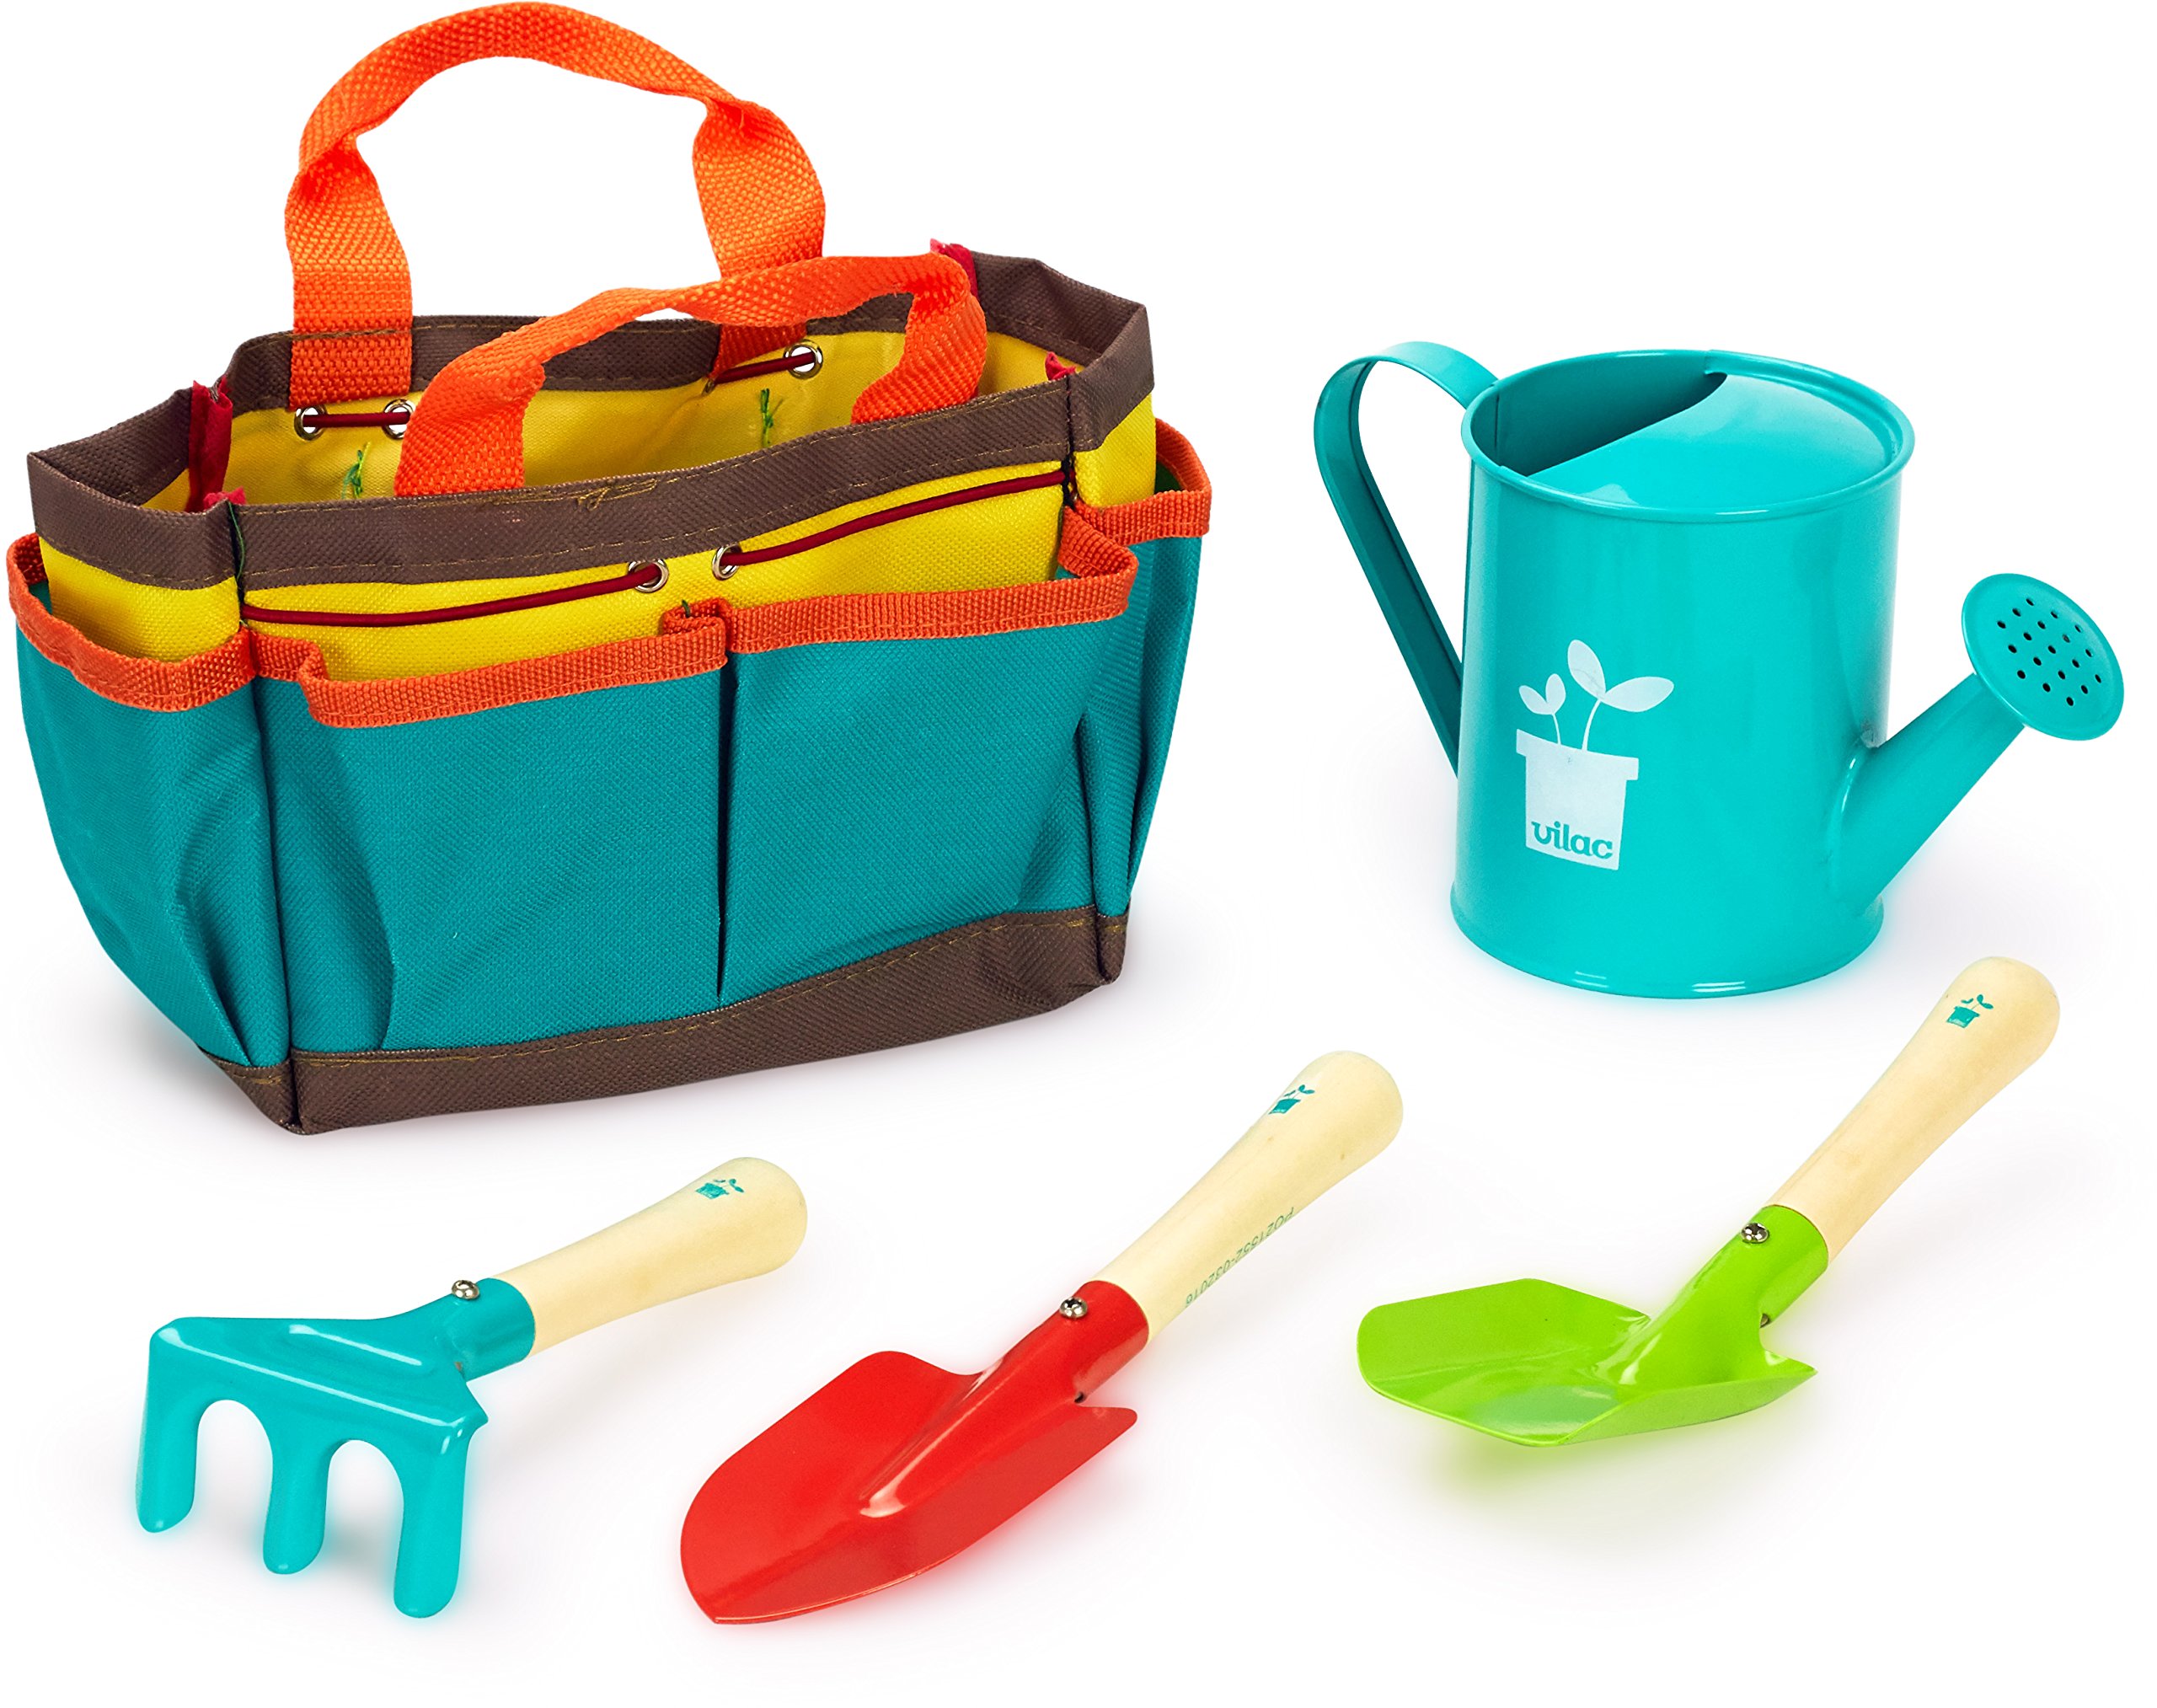 Insect Lore Vilac Gardening Tool Set For Children